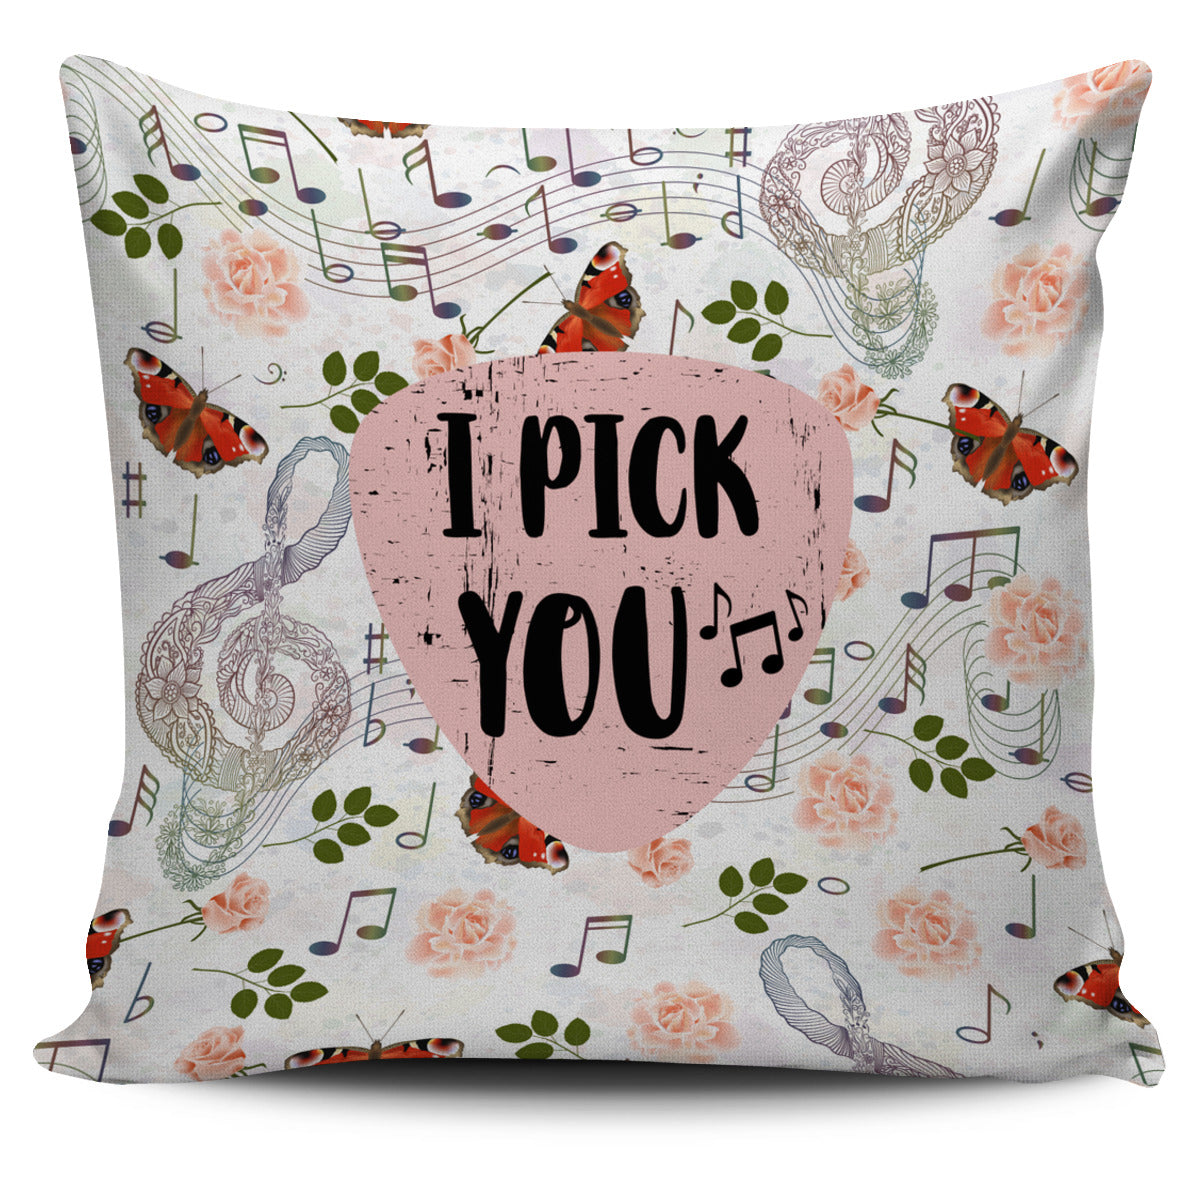 I Pick You Pillow Cover